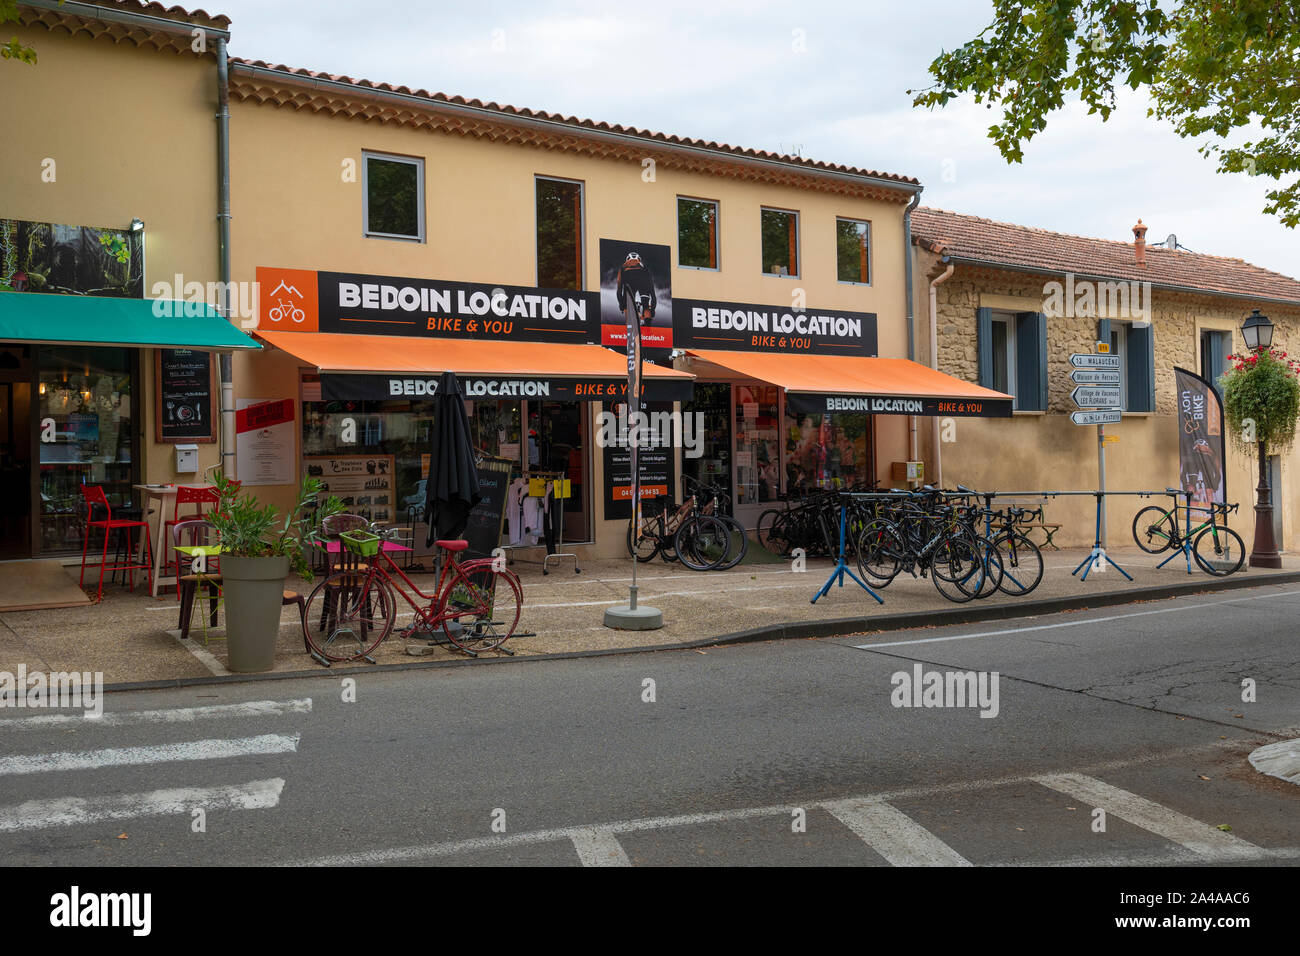 Bike hire store in Bedoin, Provence, France. Stock Photo